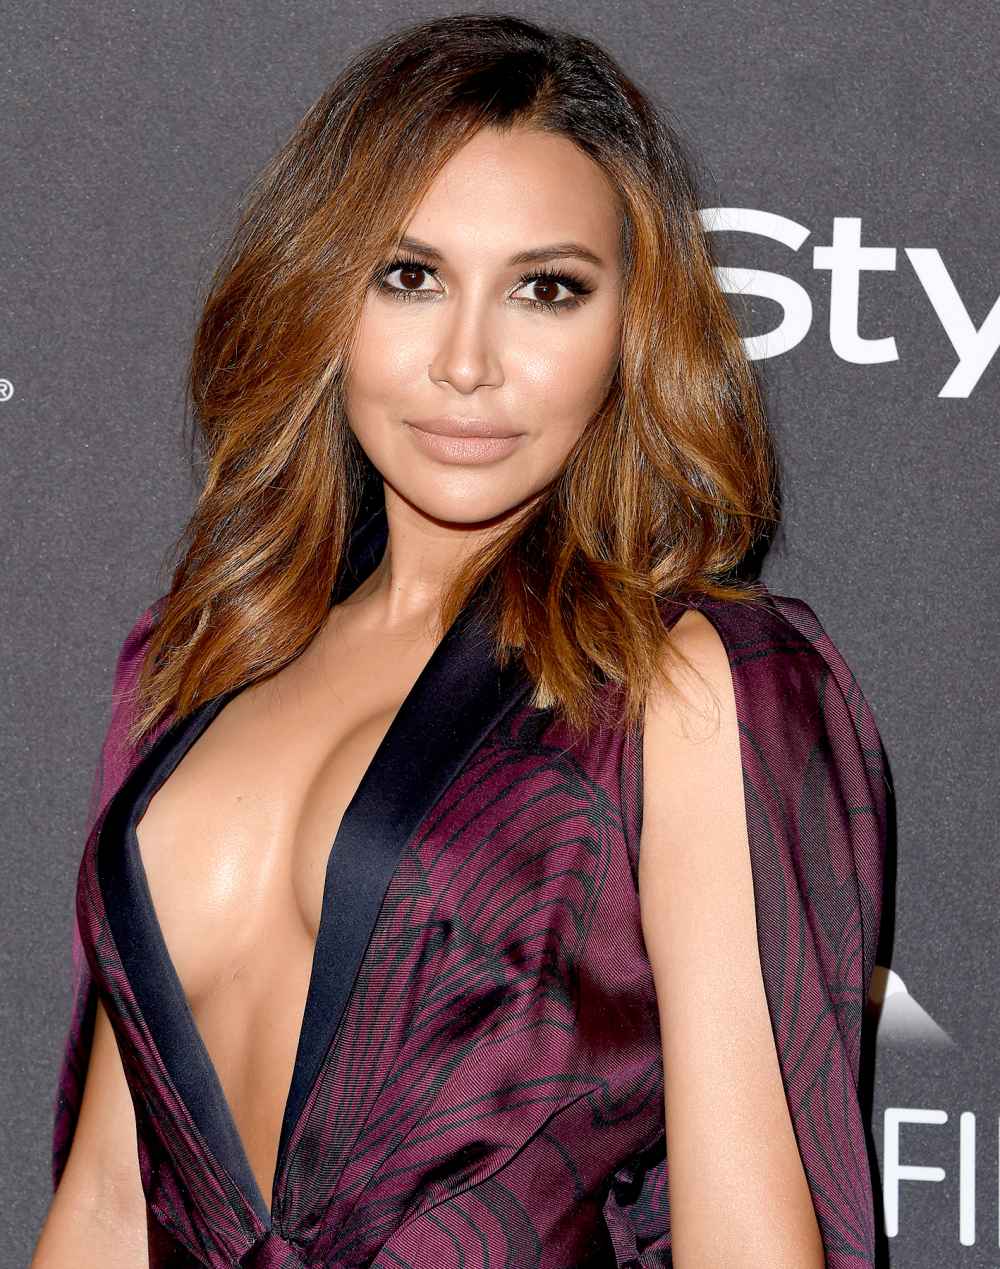 Naya Rivera arrives at the 2016 InStyle And Warner Bros. 73rd Annual Golden Globe Awards Post-Party at The Beverly Hilton Hotel on January 10, 2016 in Beverly Hills, California.